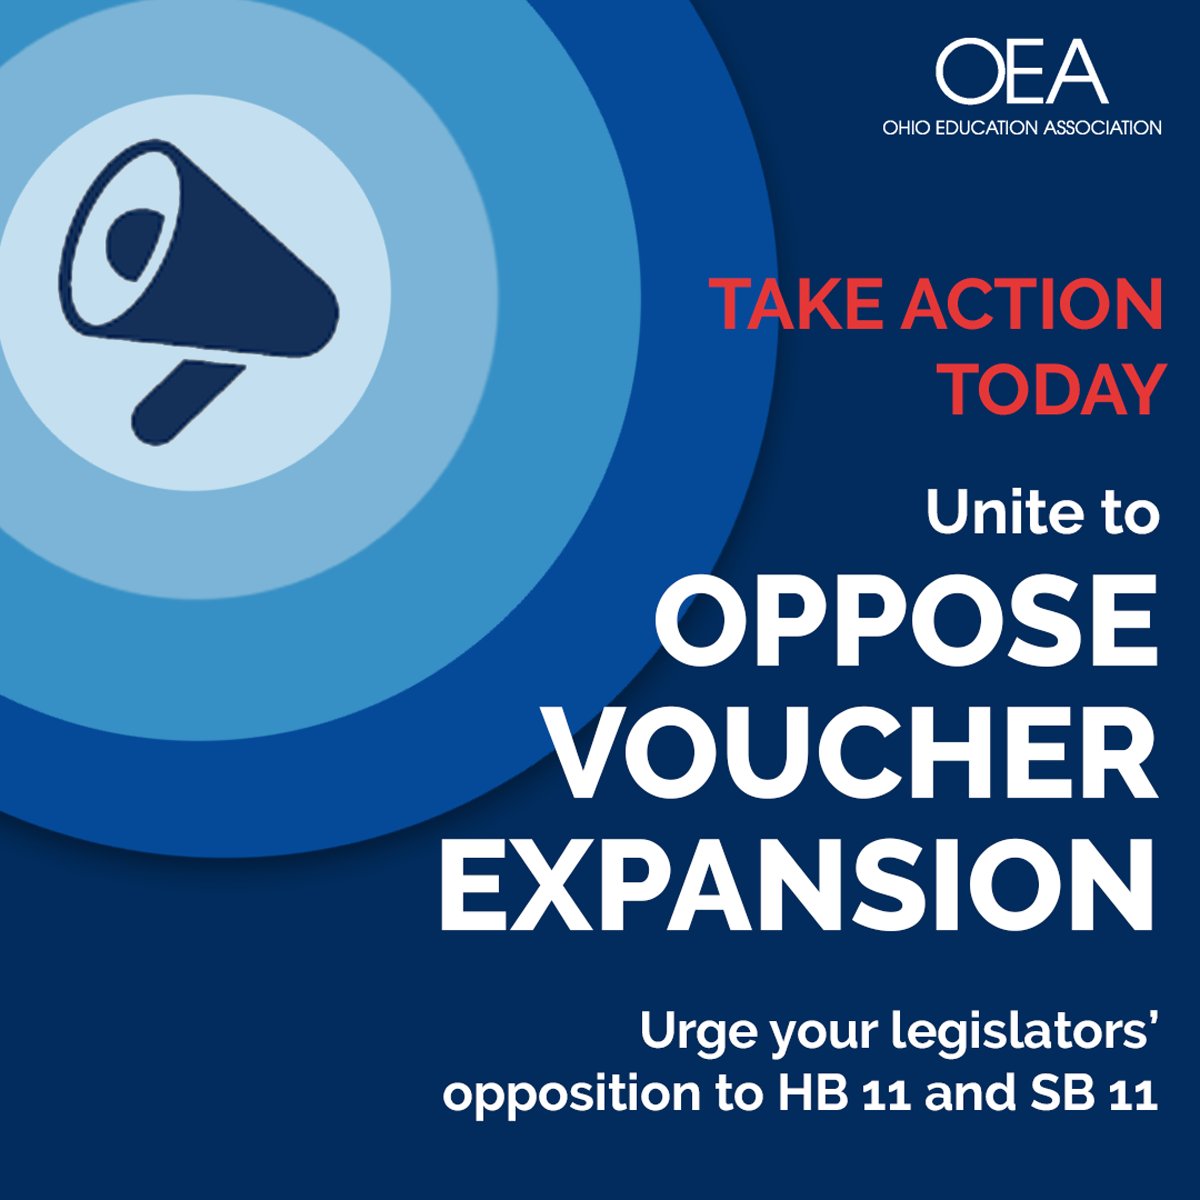 The newest #LegislativeWatch is out! 👀 Covering public education issues at the #ohiostatehouse. Several bills which OEA opposes are scheduled to receive hearings. It is imperative that OEA members make their voices heard in opposition

ohea.org/legislative-wa…